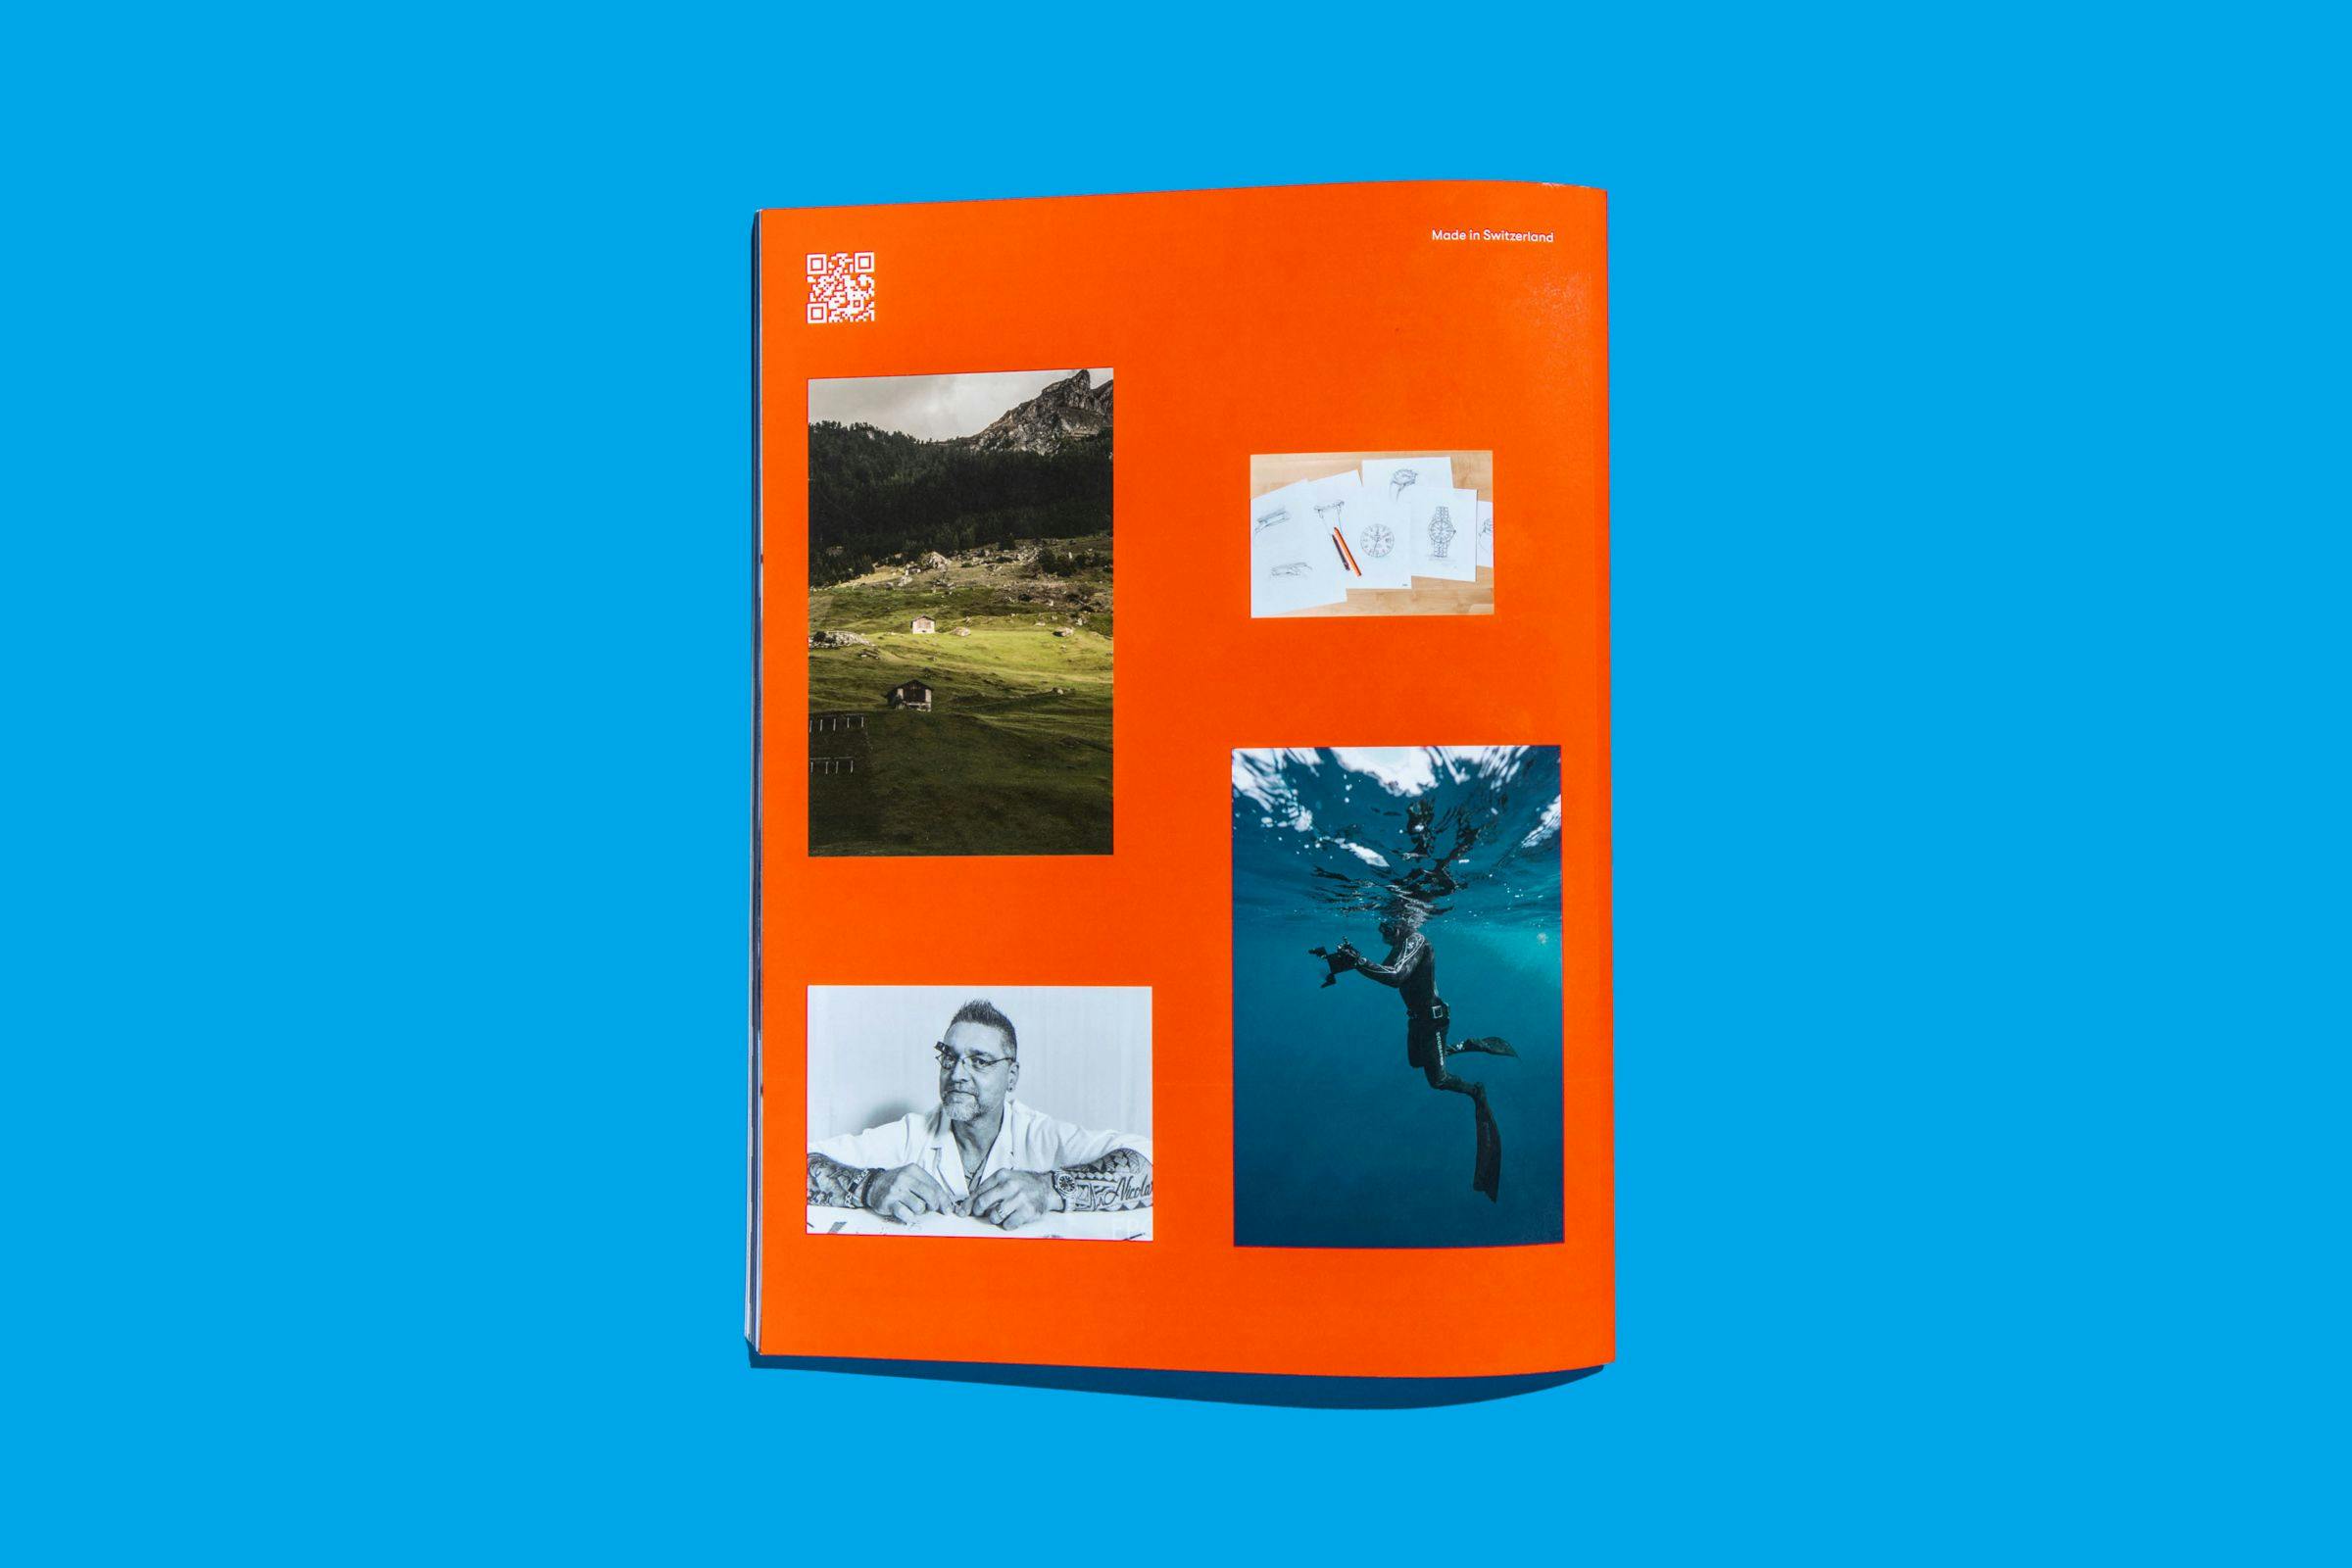 A page from the Zodiac Watches: Brand book showing four photos on an orange background 